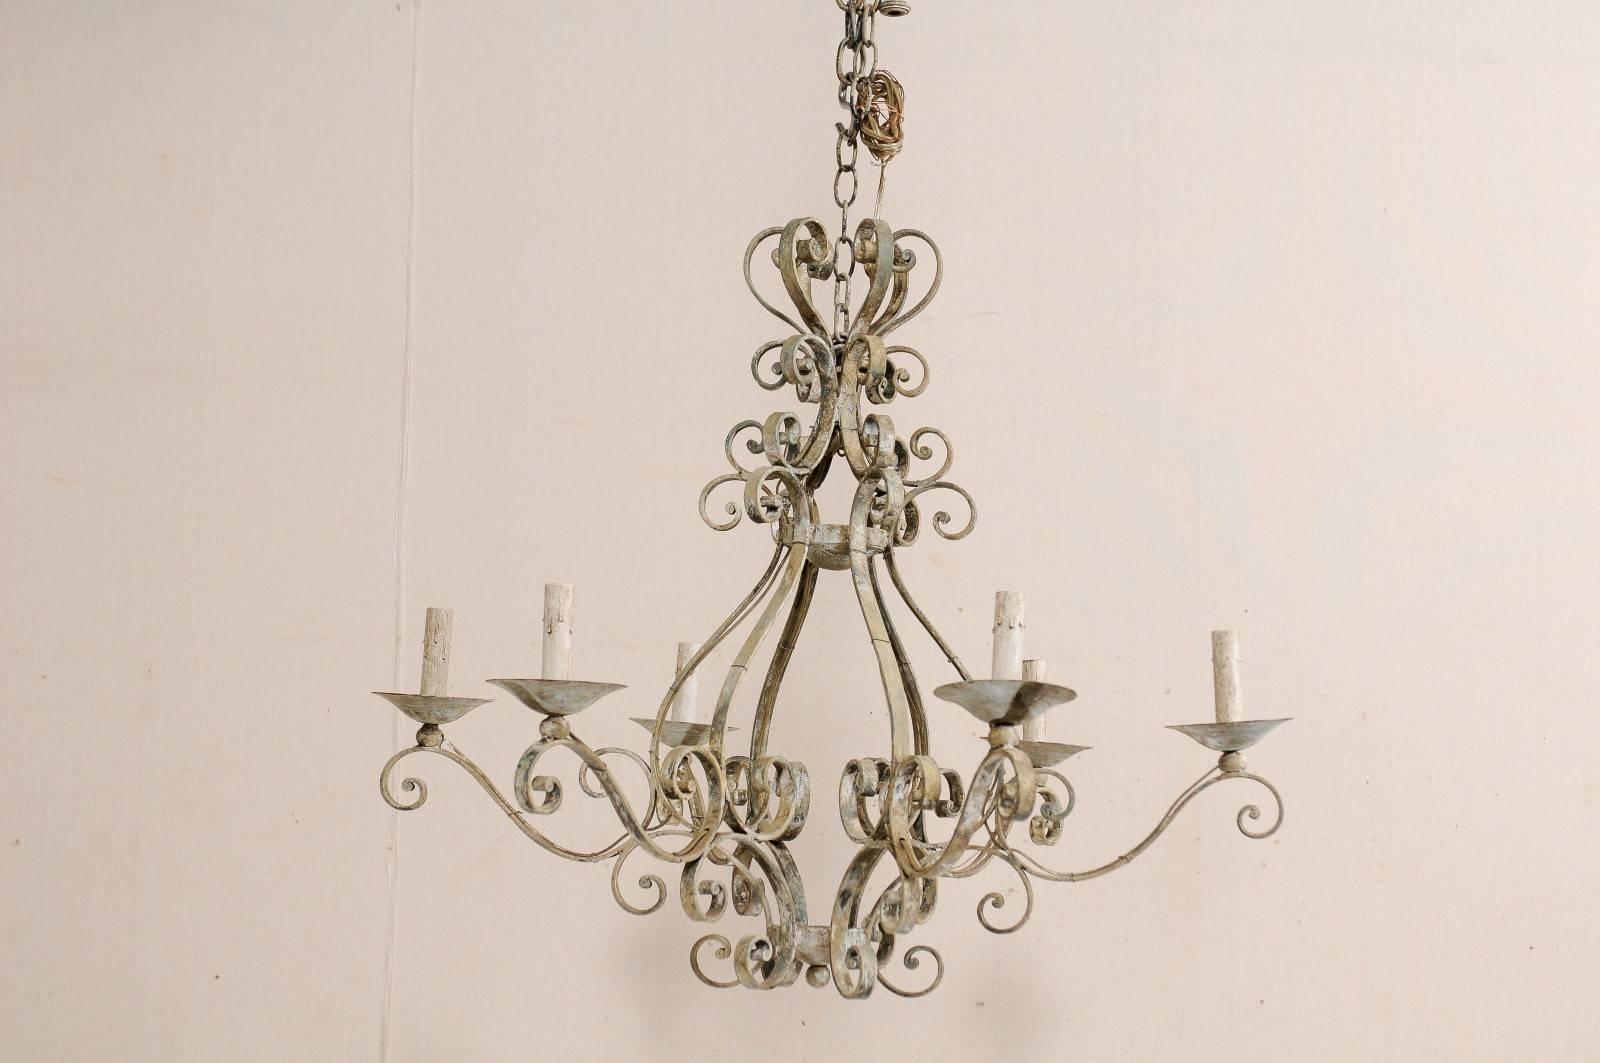 French Mid-20th Century Iron Chandelier Painted with Neutral Beige & Tan Colors 2